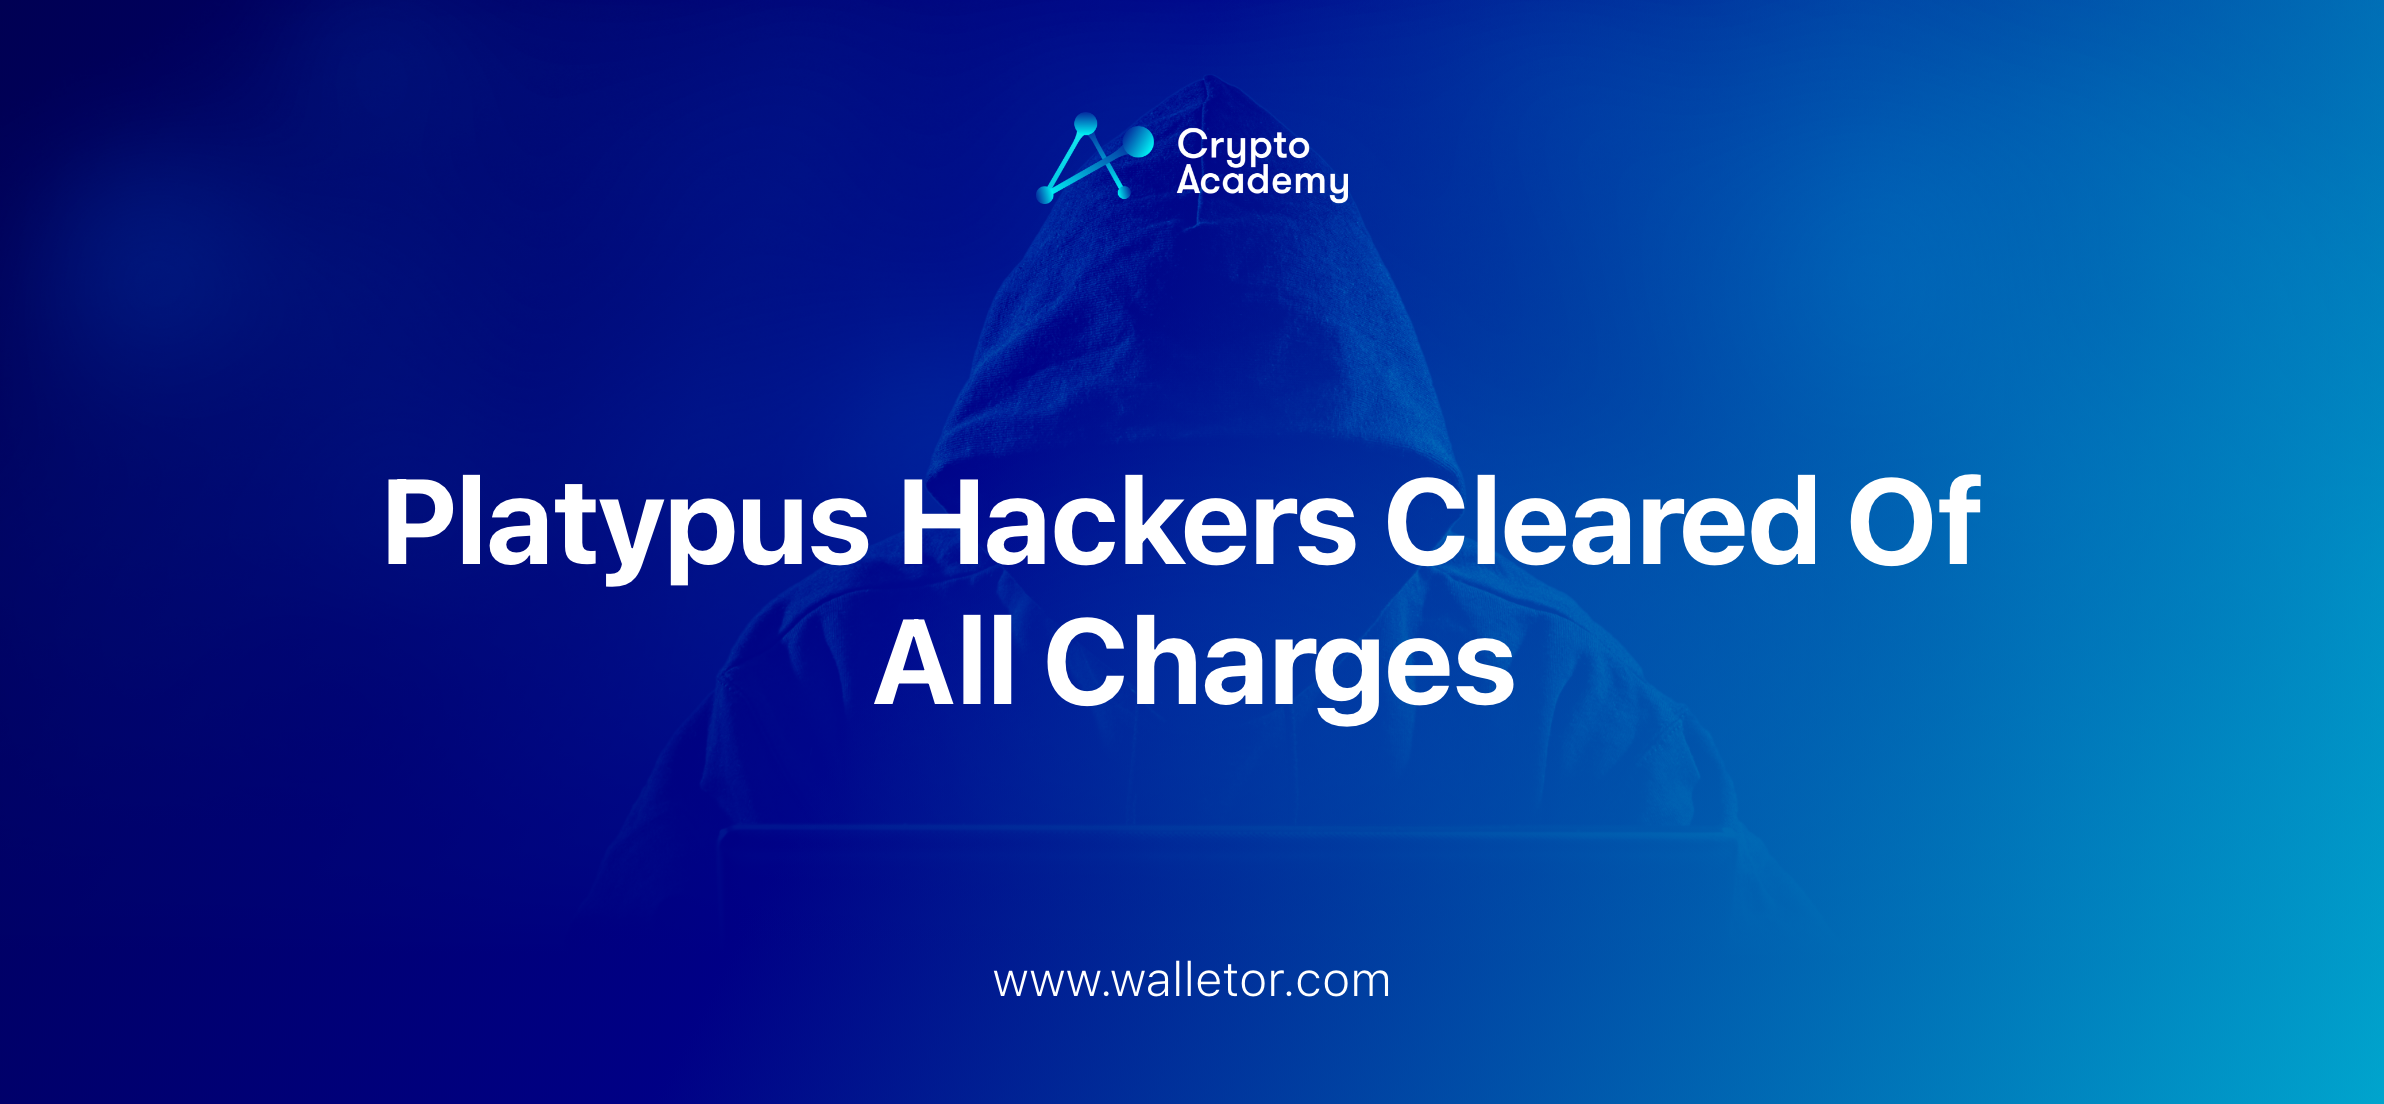 Platypus Hackers Cleared Of All Charges